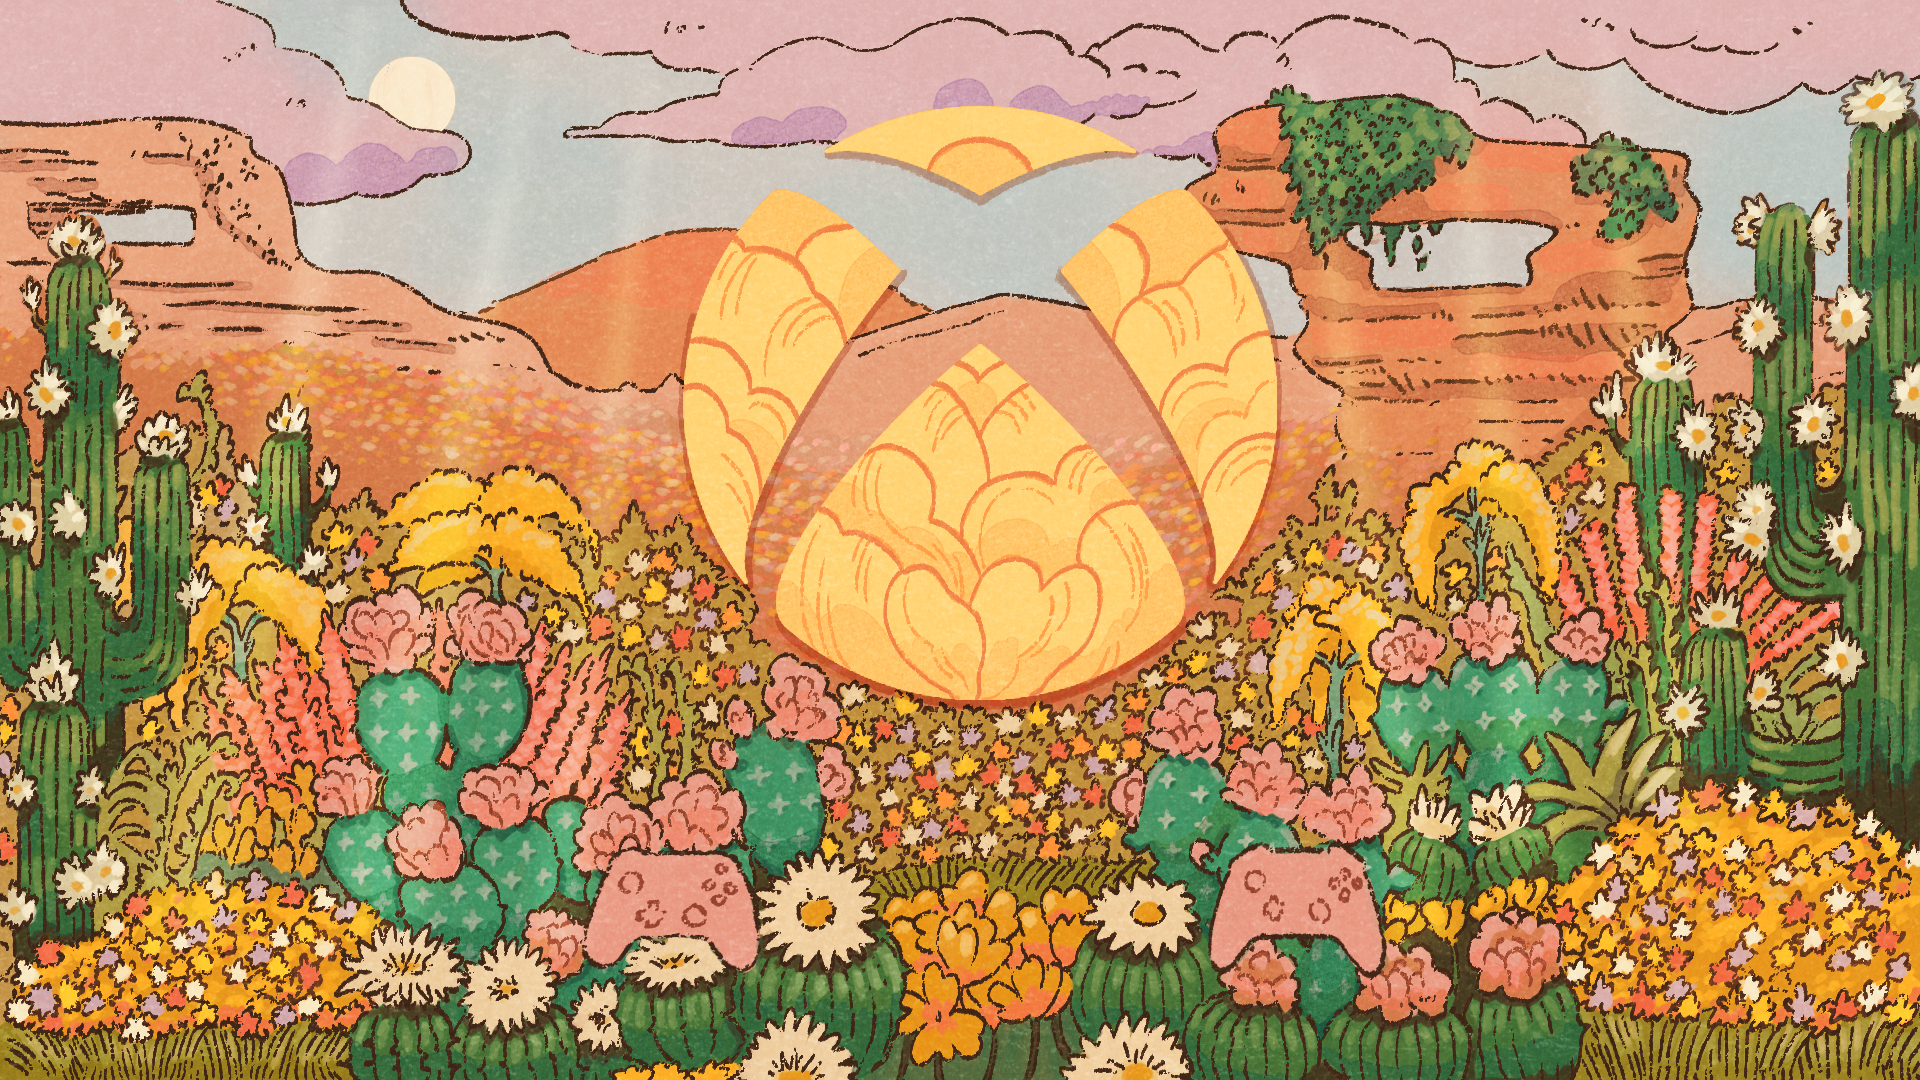 A stylized Xbox logo featuring an orange floral petal pattern on a blooming desert landscape including cacti with pink, yellow, and white blossoms and two pink Xbox controllers.